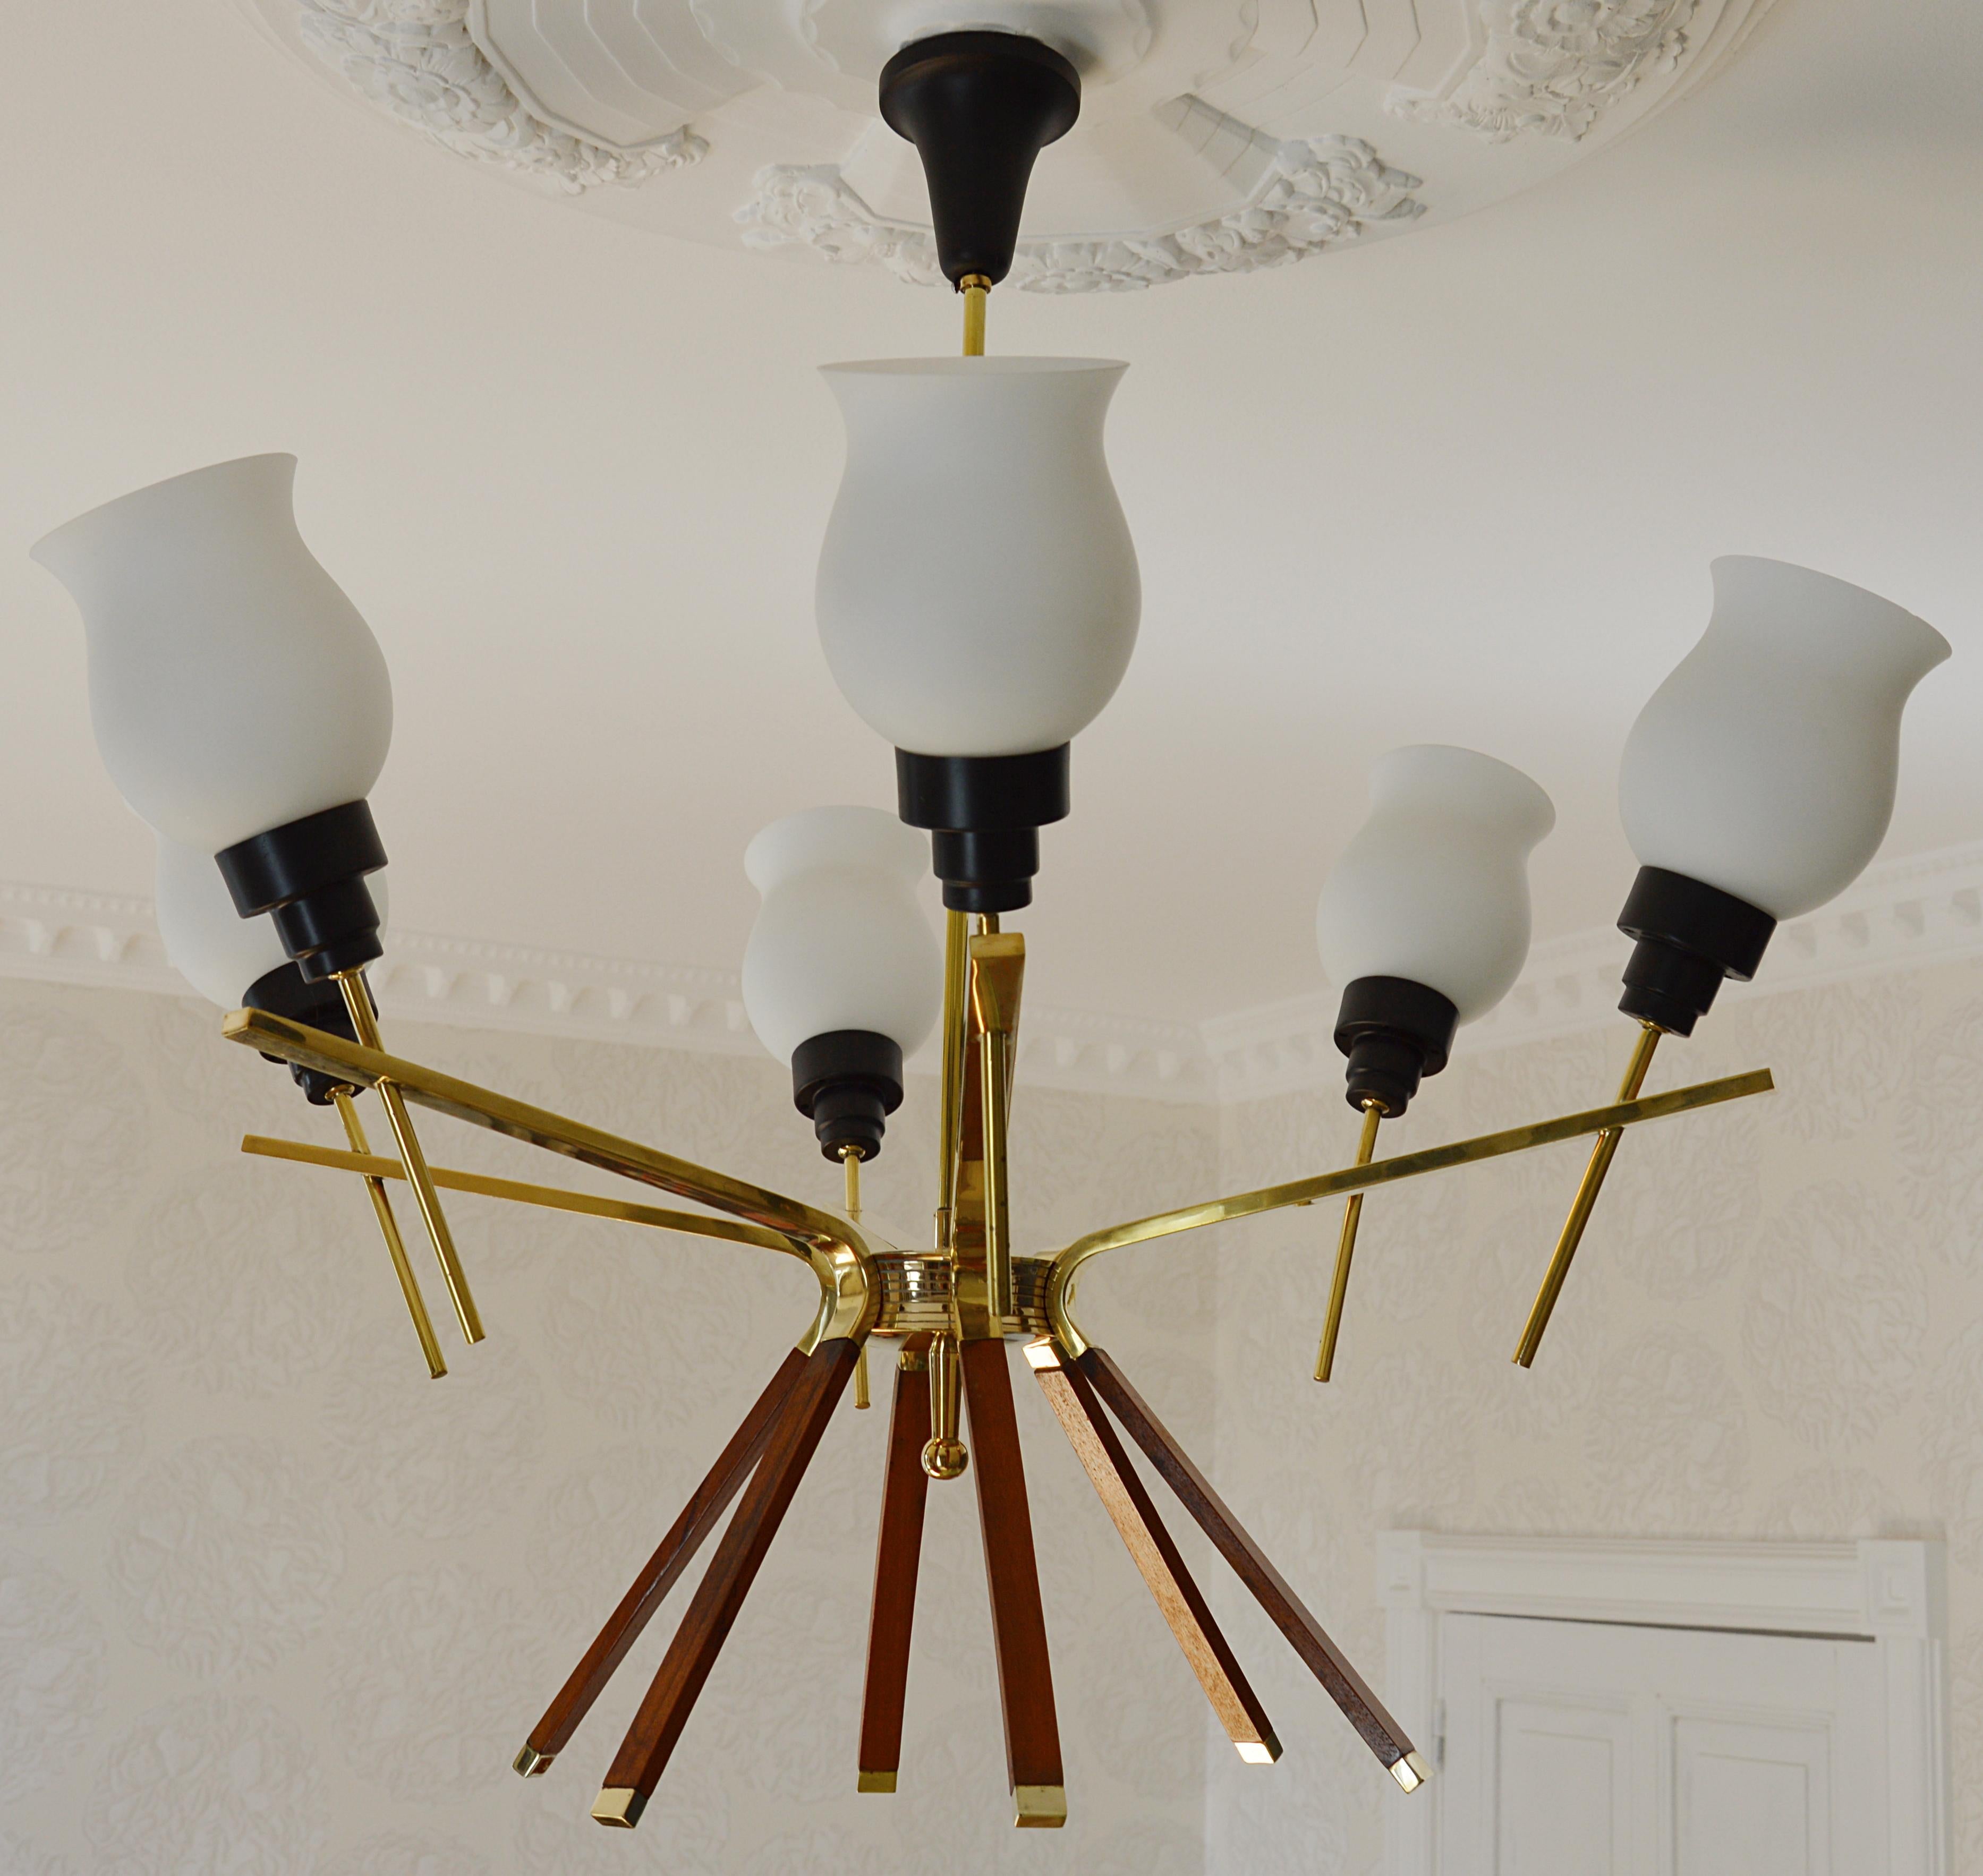 Midcentury chandelier by Arlus, France, 1960s. Brass, wood, metal and glass. Six-light for this first class elegant chandelier. Same period as Lunel and Stilnovo. Delivered wired for your country (US, UK, EU, Australia, China, etc.). LED can be used